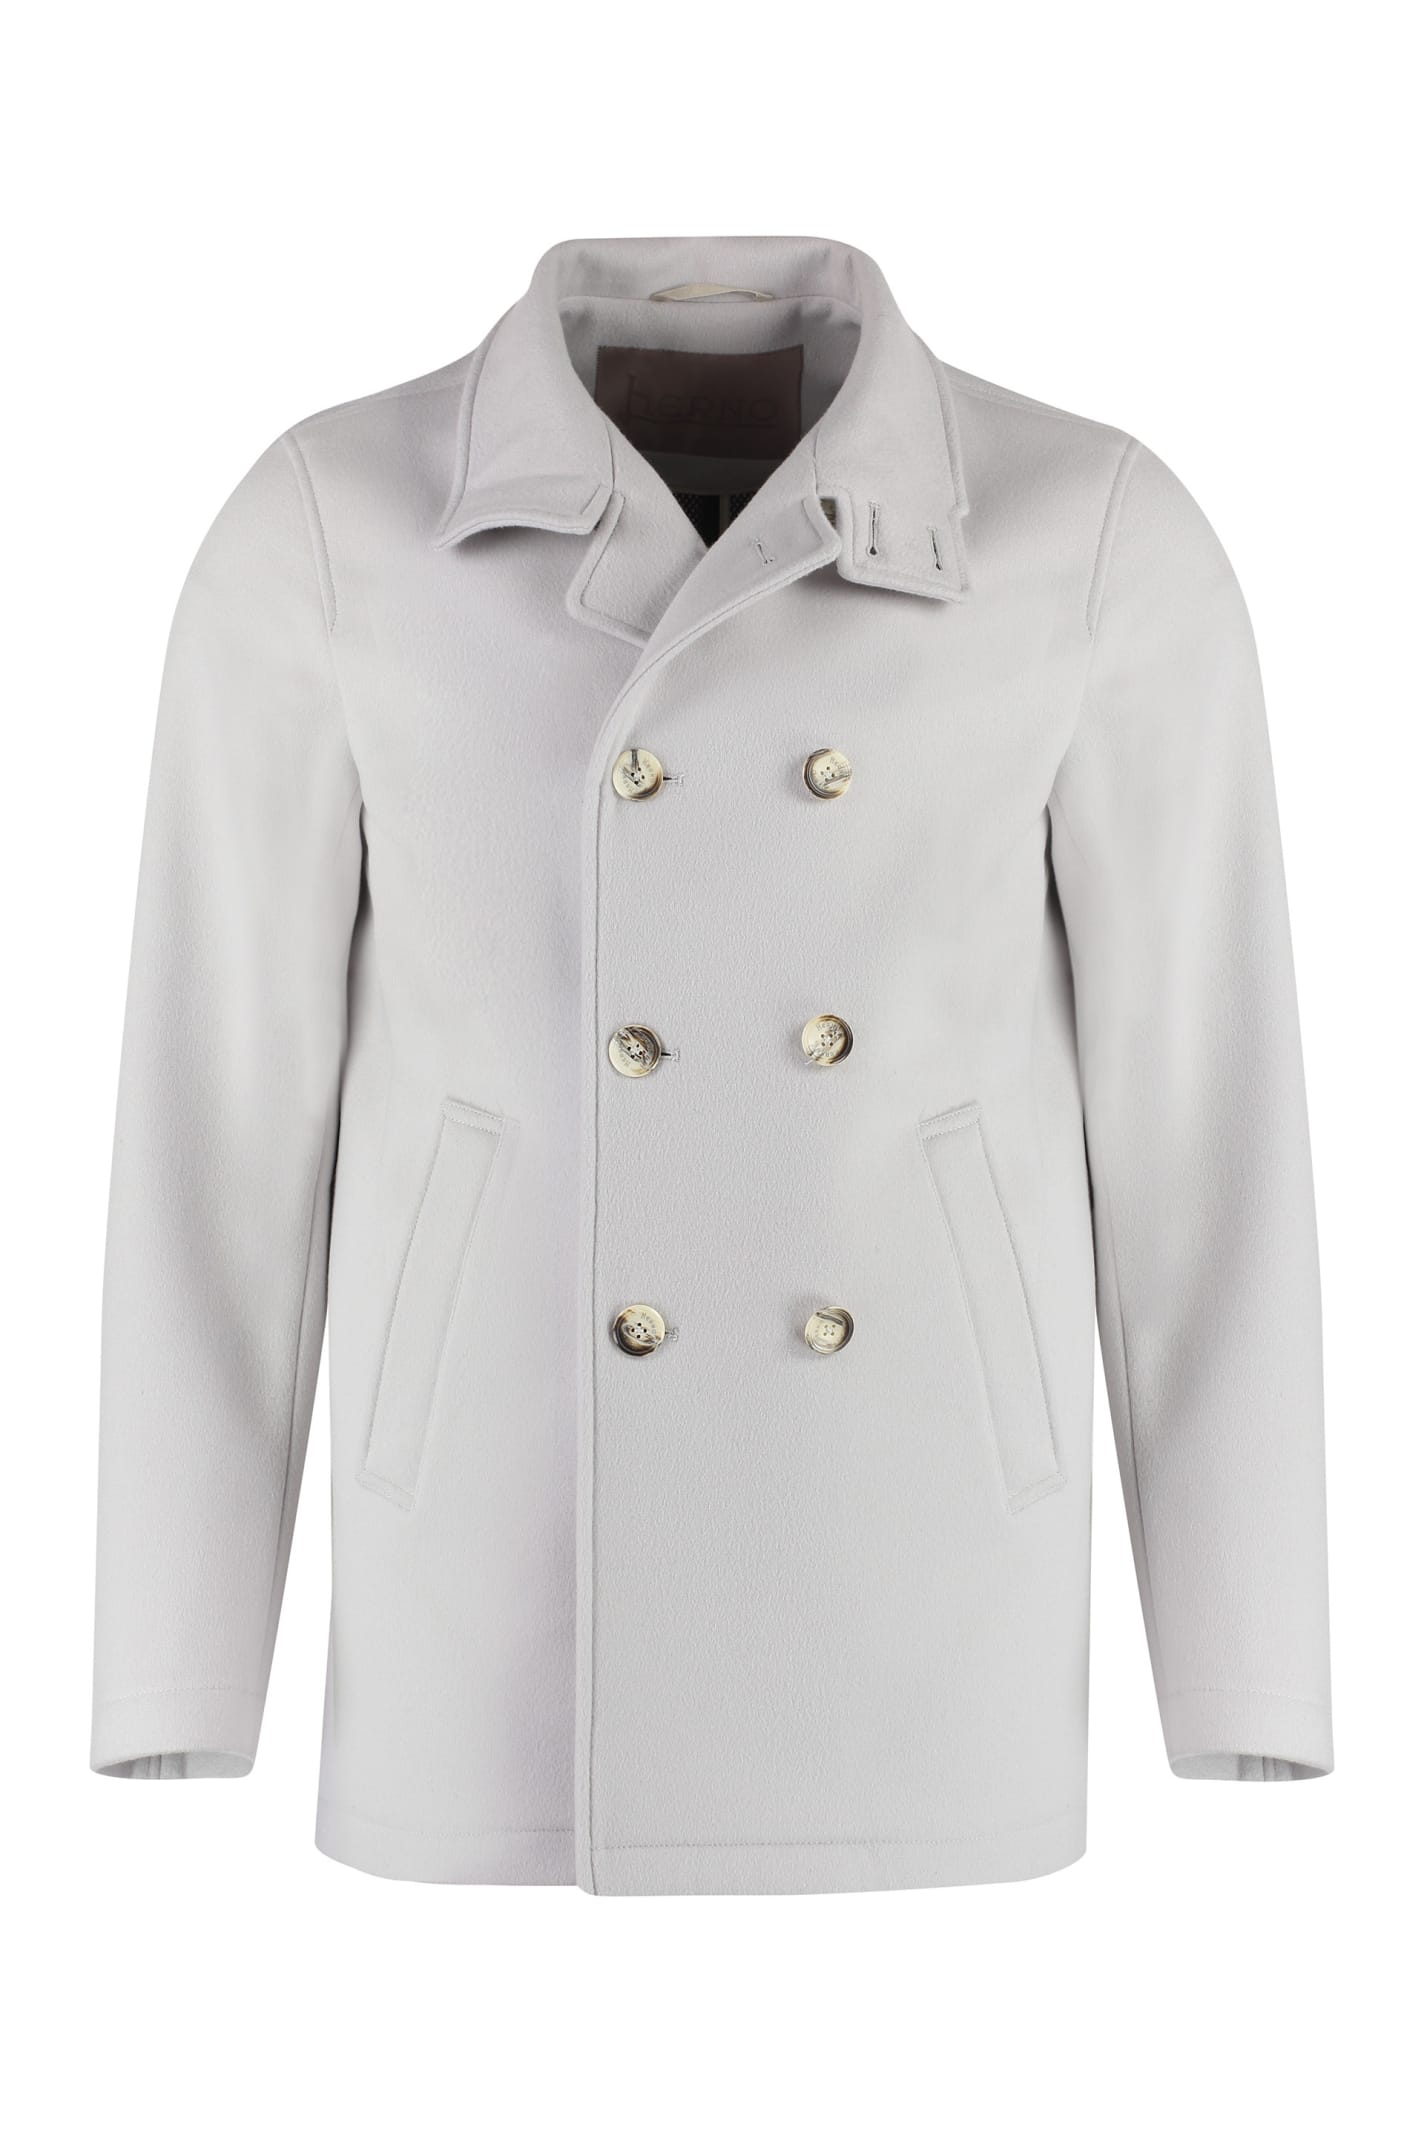 Herno Wool And Cashmere Coat In Chantilly